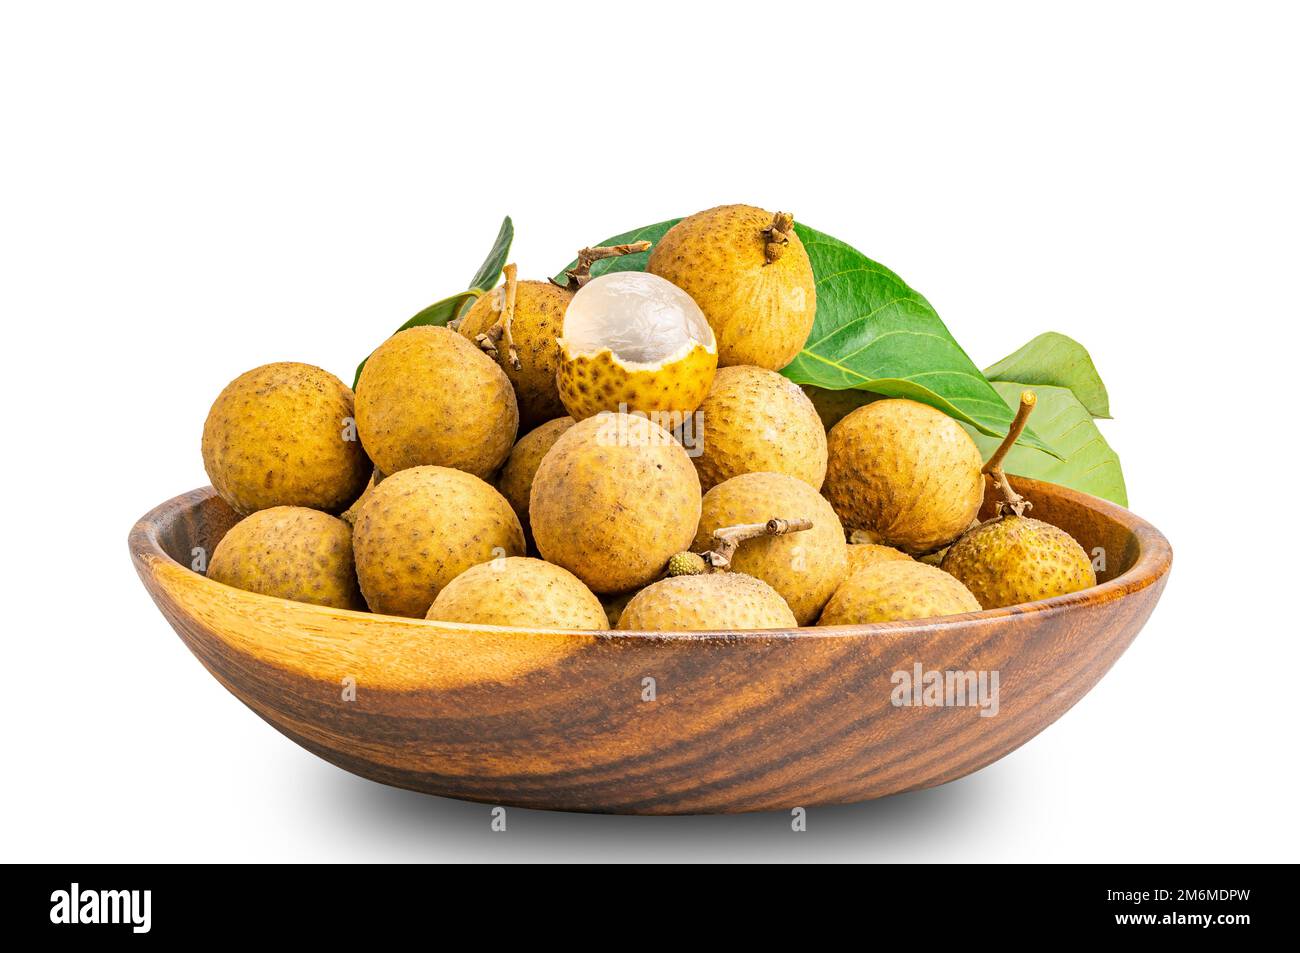 Pile of fresh longan fruit whole and a half peeled with green leaf in wooden bowl isolated on white background. Stock Photo